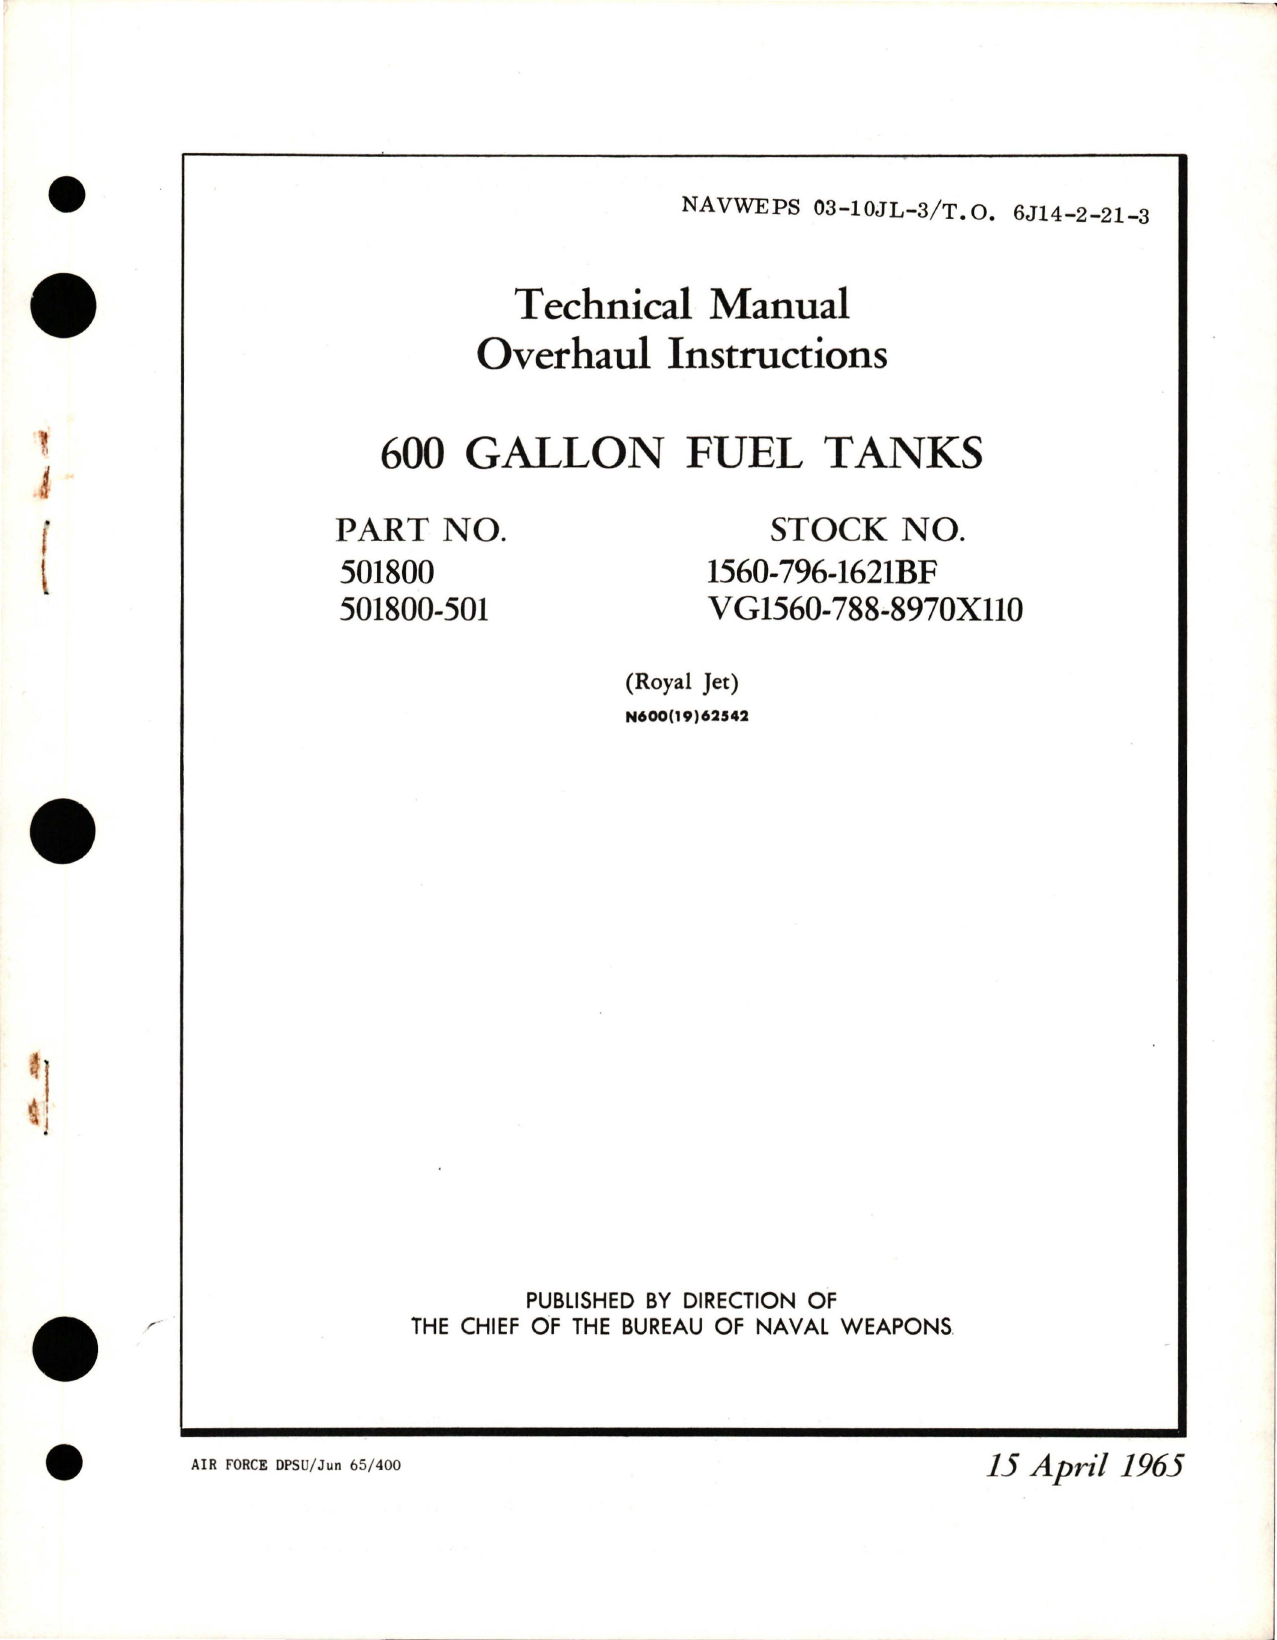 Sample page 1 from AirCorps Library document: Overhaul Instructions for 600 Gallon Fuel Tanks - Parts 501800 and 501800-501